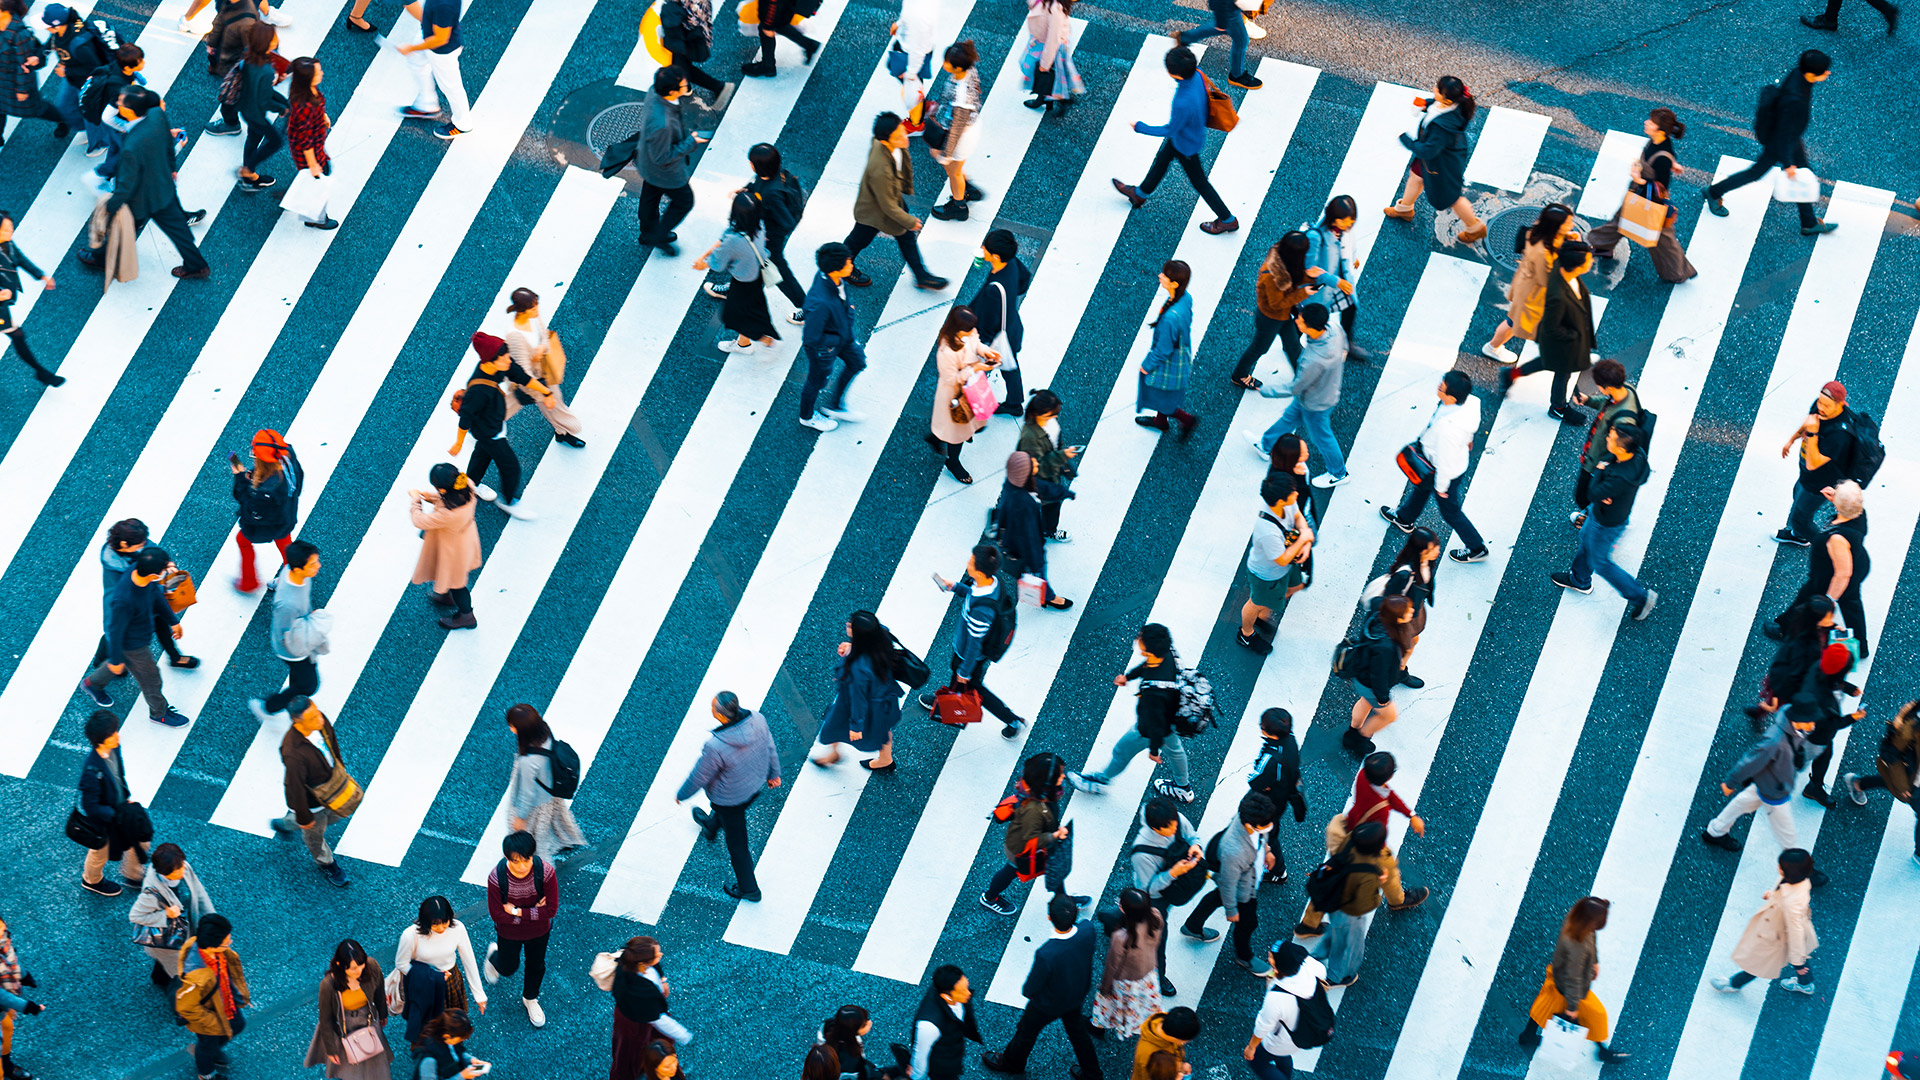 Shibuya crossing in known to be the world's busiest pedestrian crossing